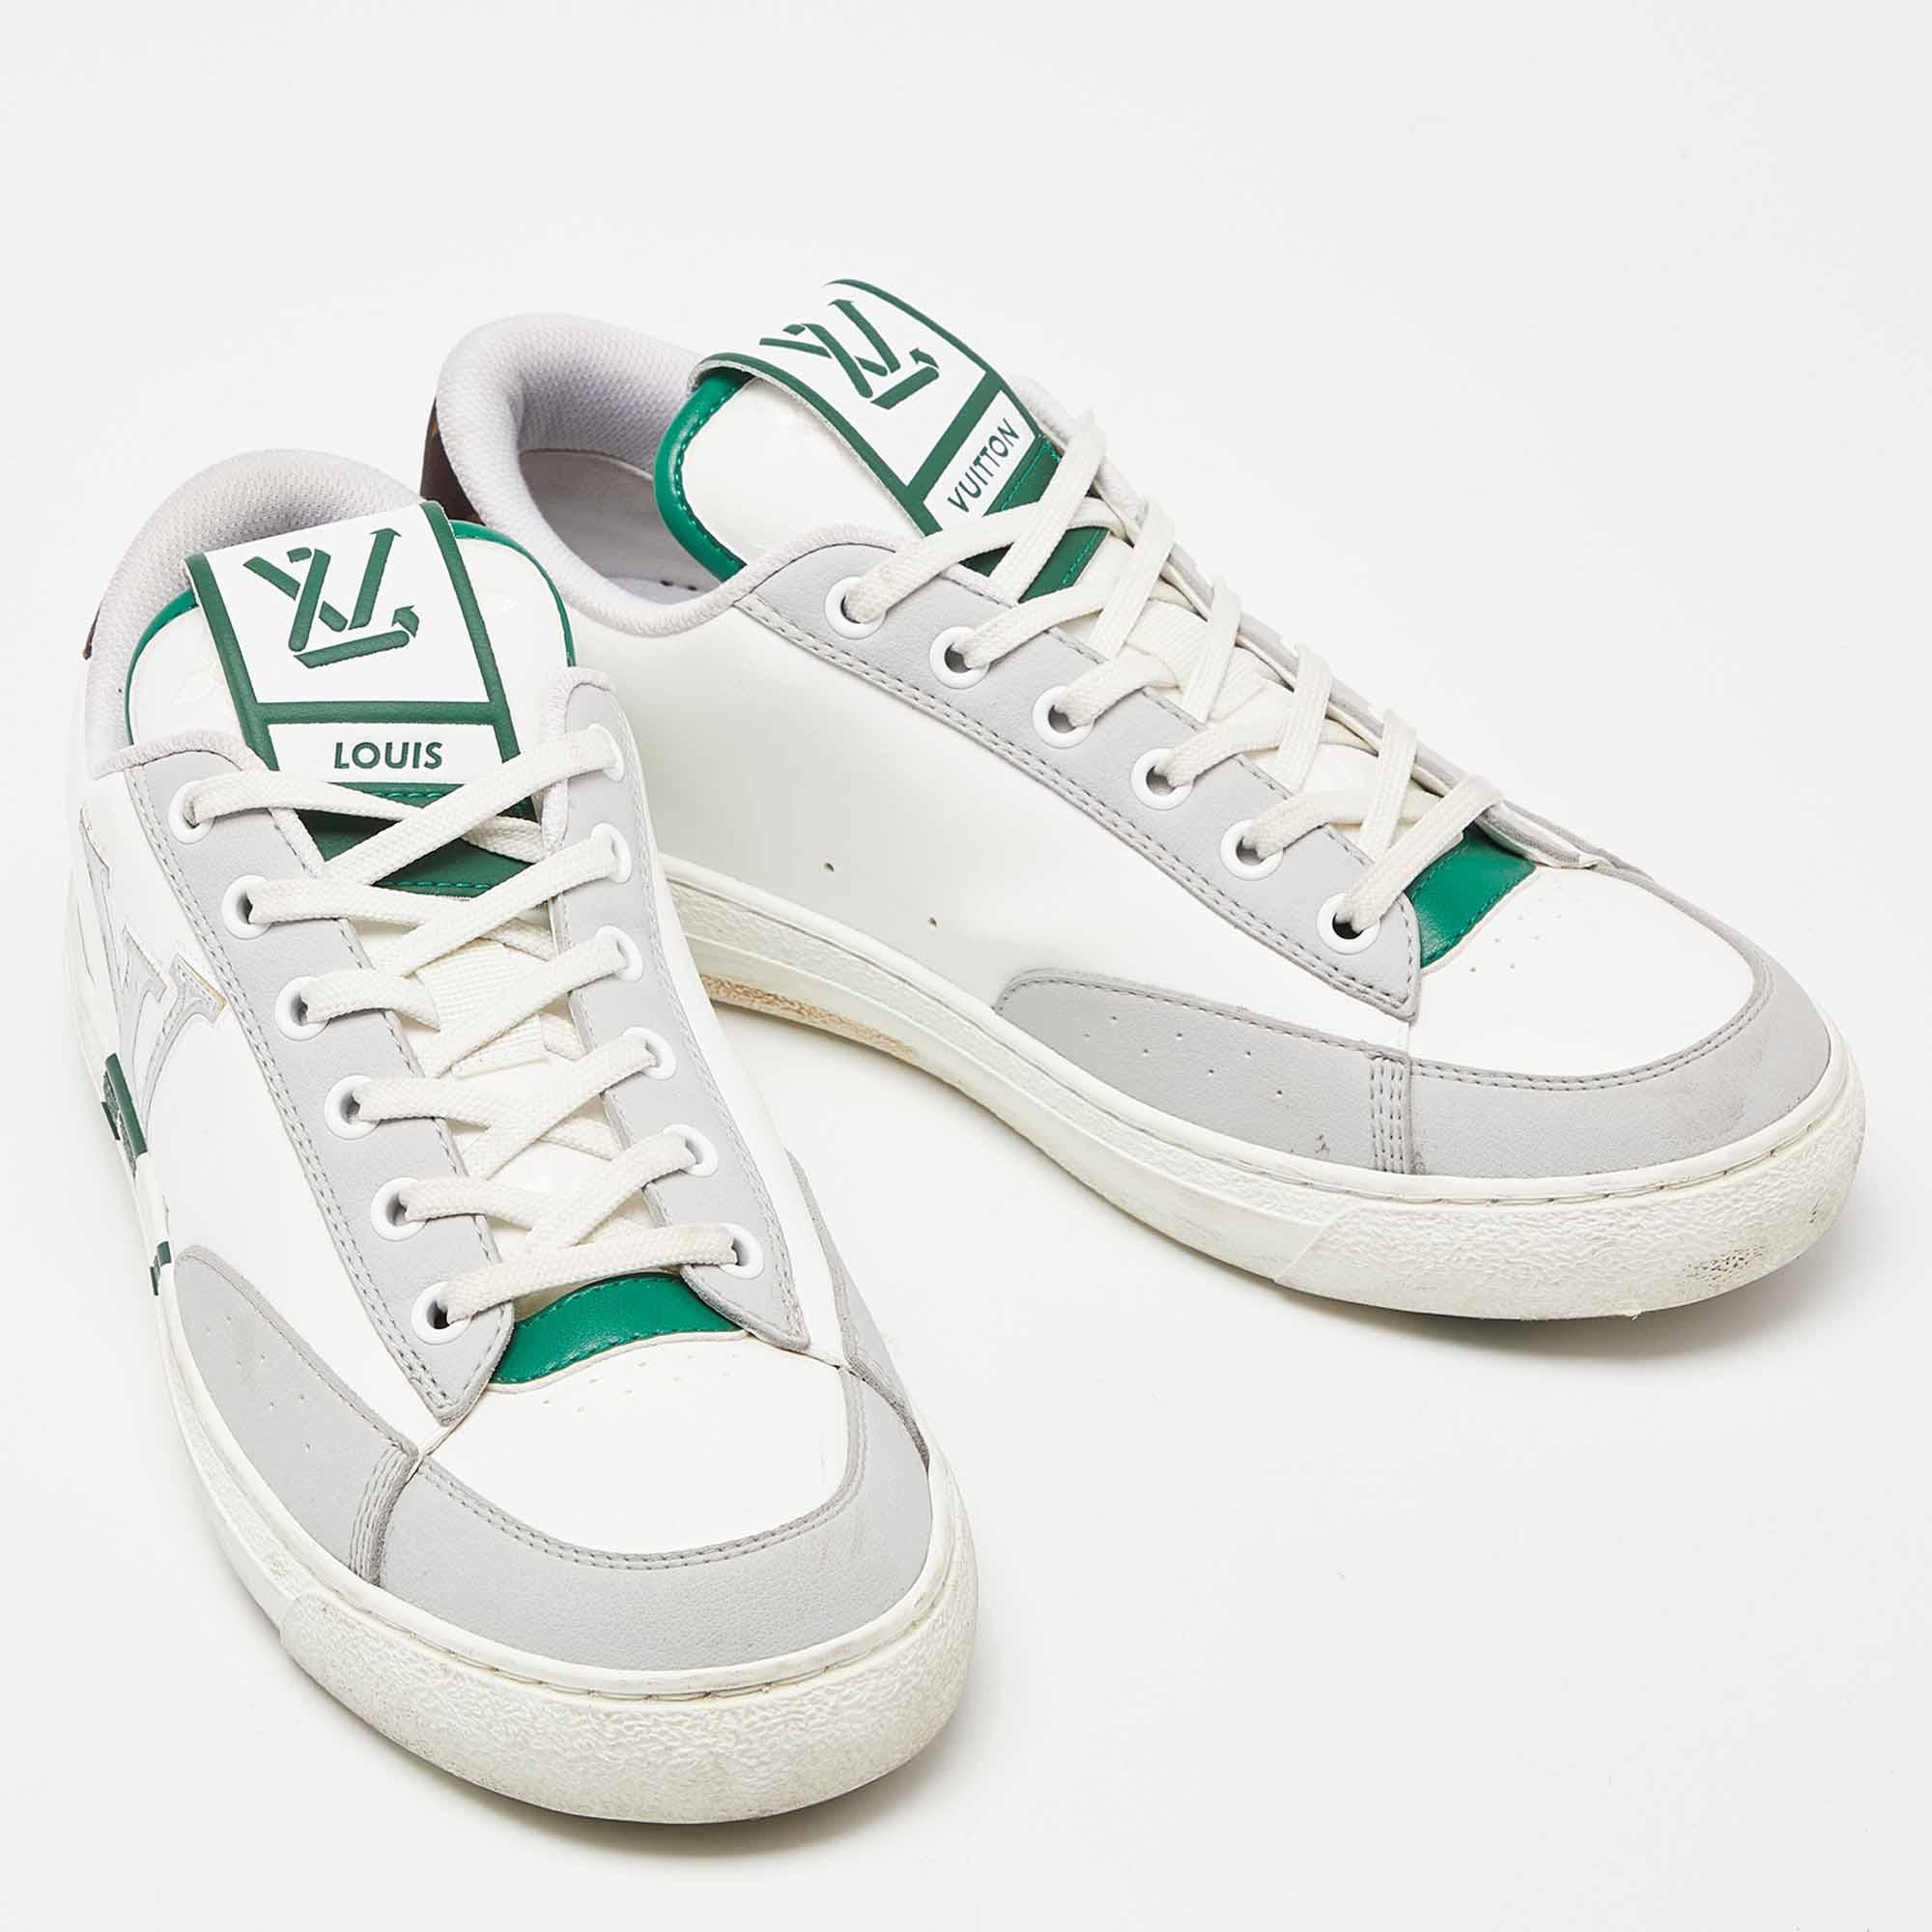 Louis Vuitton White/Green Leather Charlie Sneakers Size 39 In Good Condition For Sale In Dubai, Al Qouz 2